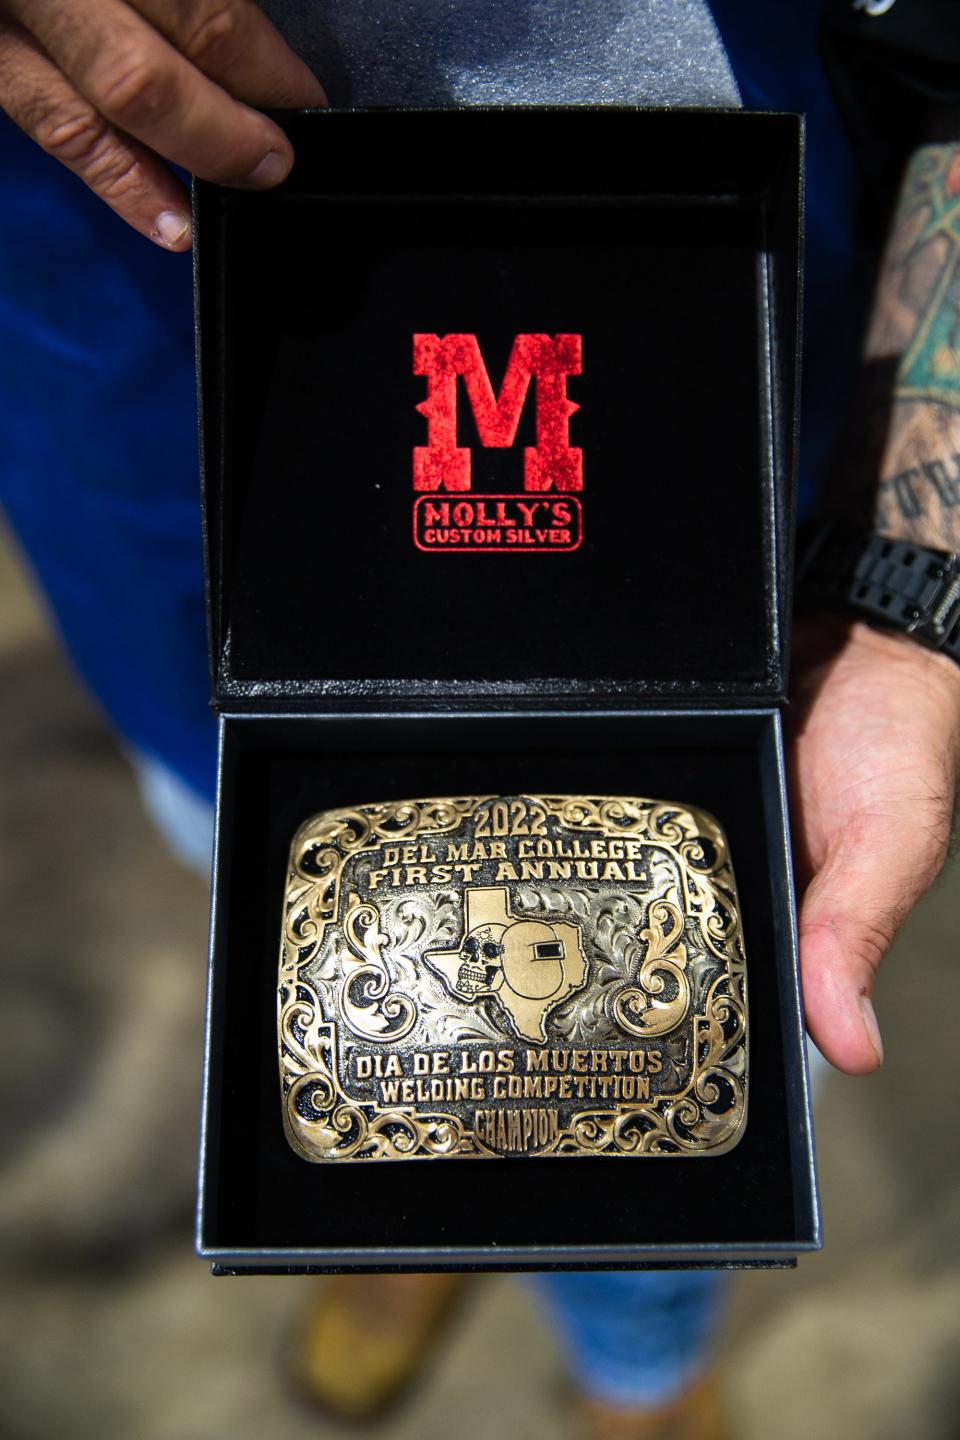 Samuel Garcia, Del Mar College assistant professor of welding applied technology, displays a belt buckle award at the school's Día de los Muertos Welding Competition, an event he organized, on Friday, Nov. 4, 2022, in Corpus Christi, Texas.